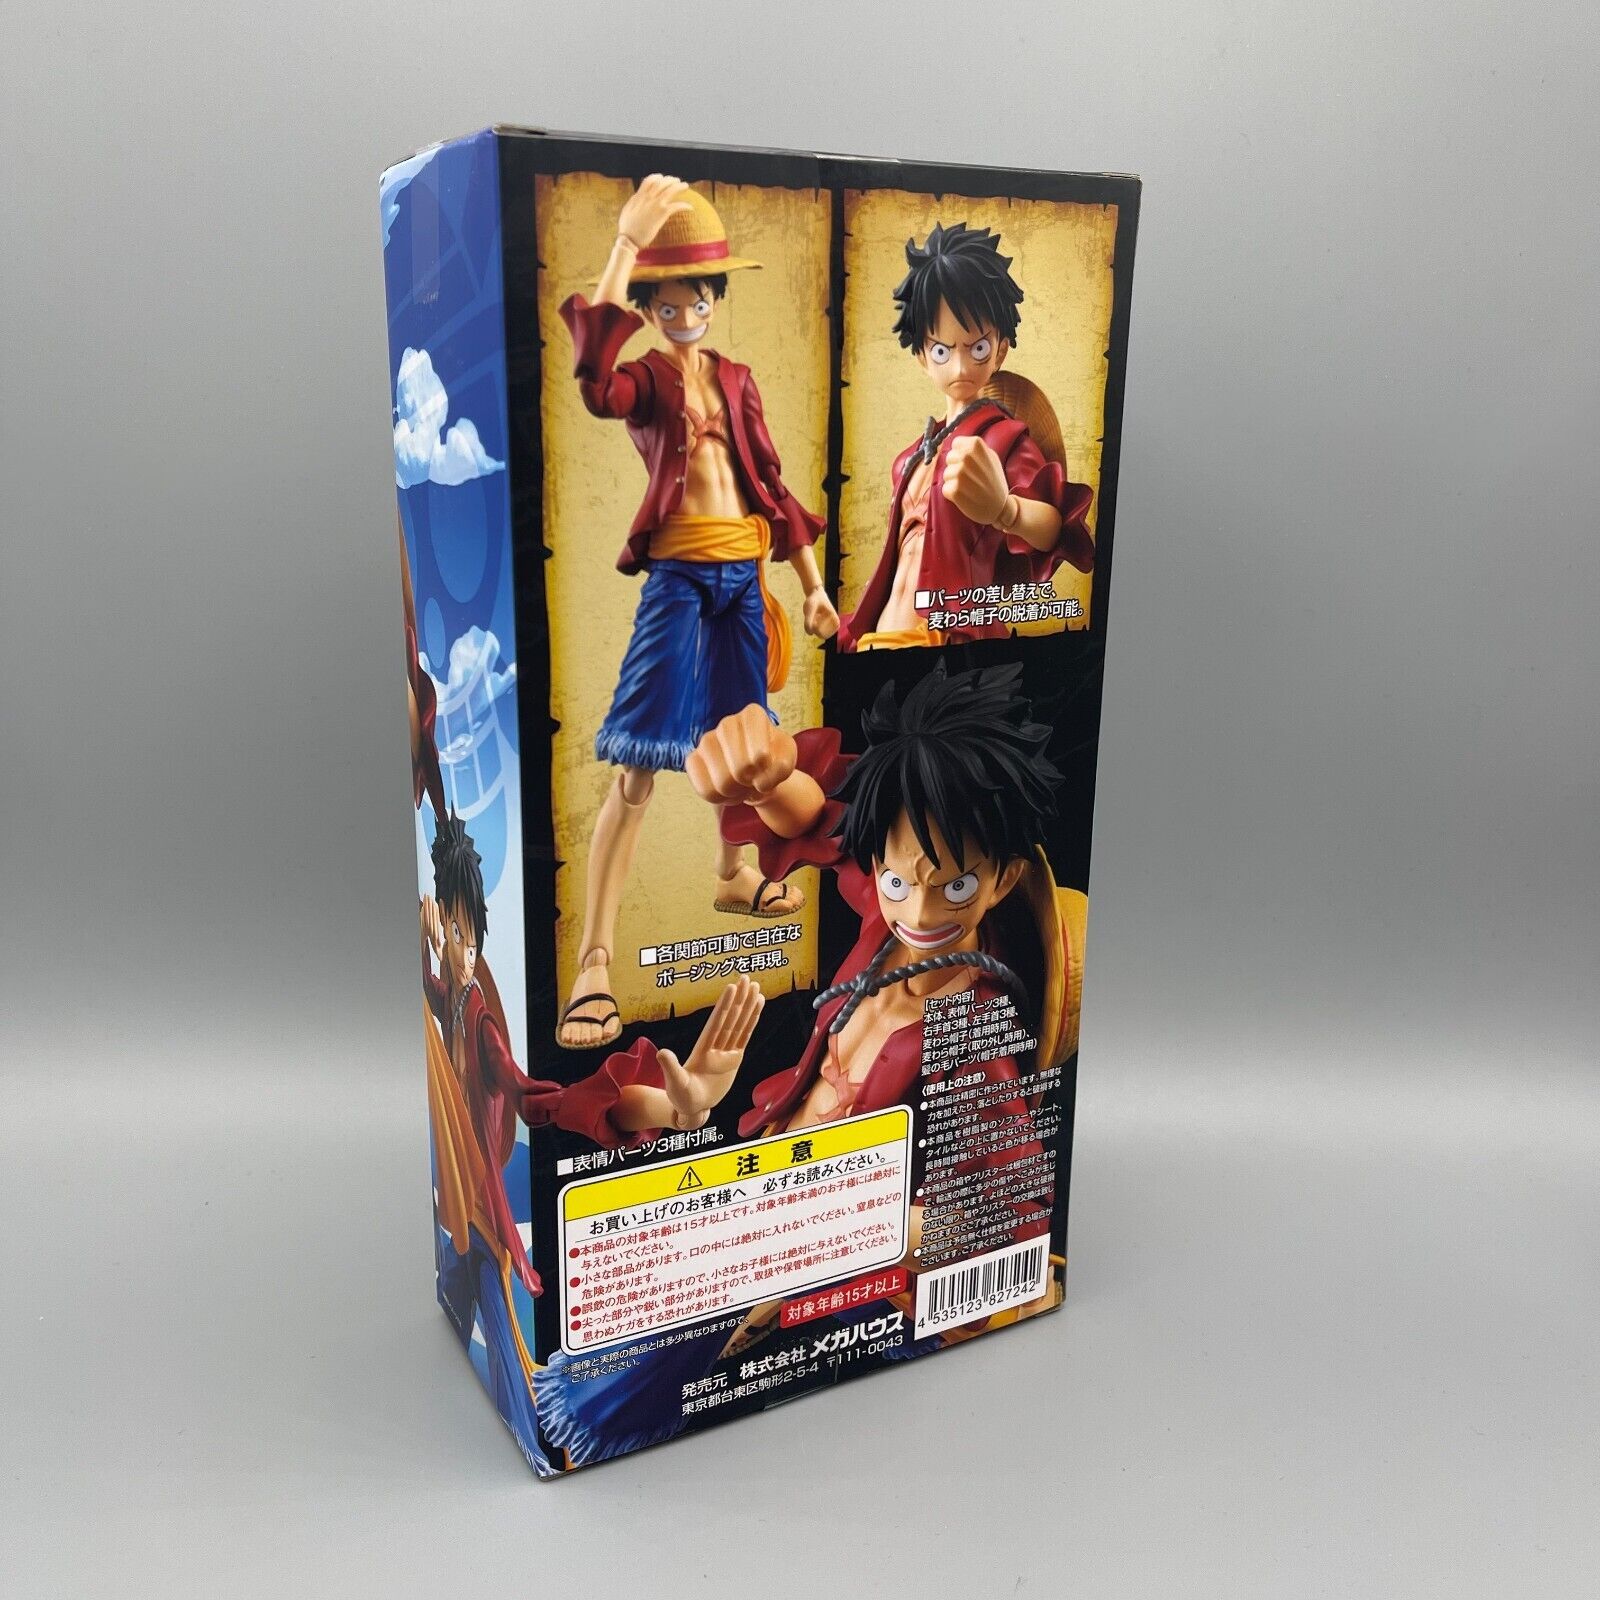 Monkey D Luffy Variable Action Heroes, Megahouse